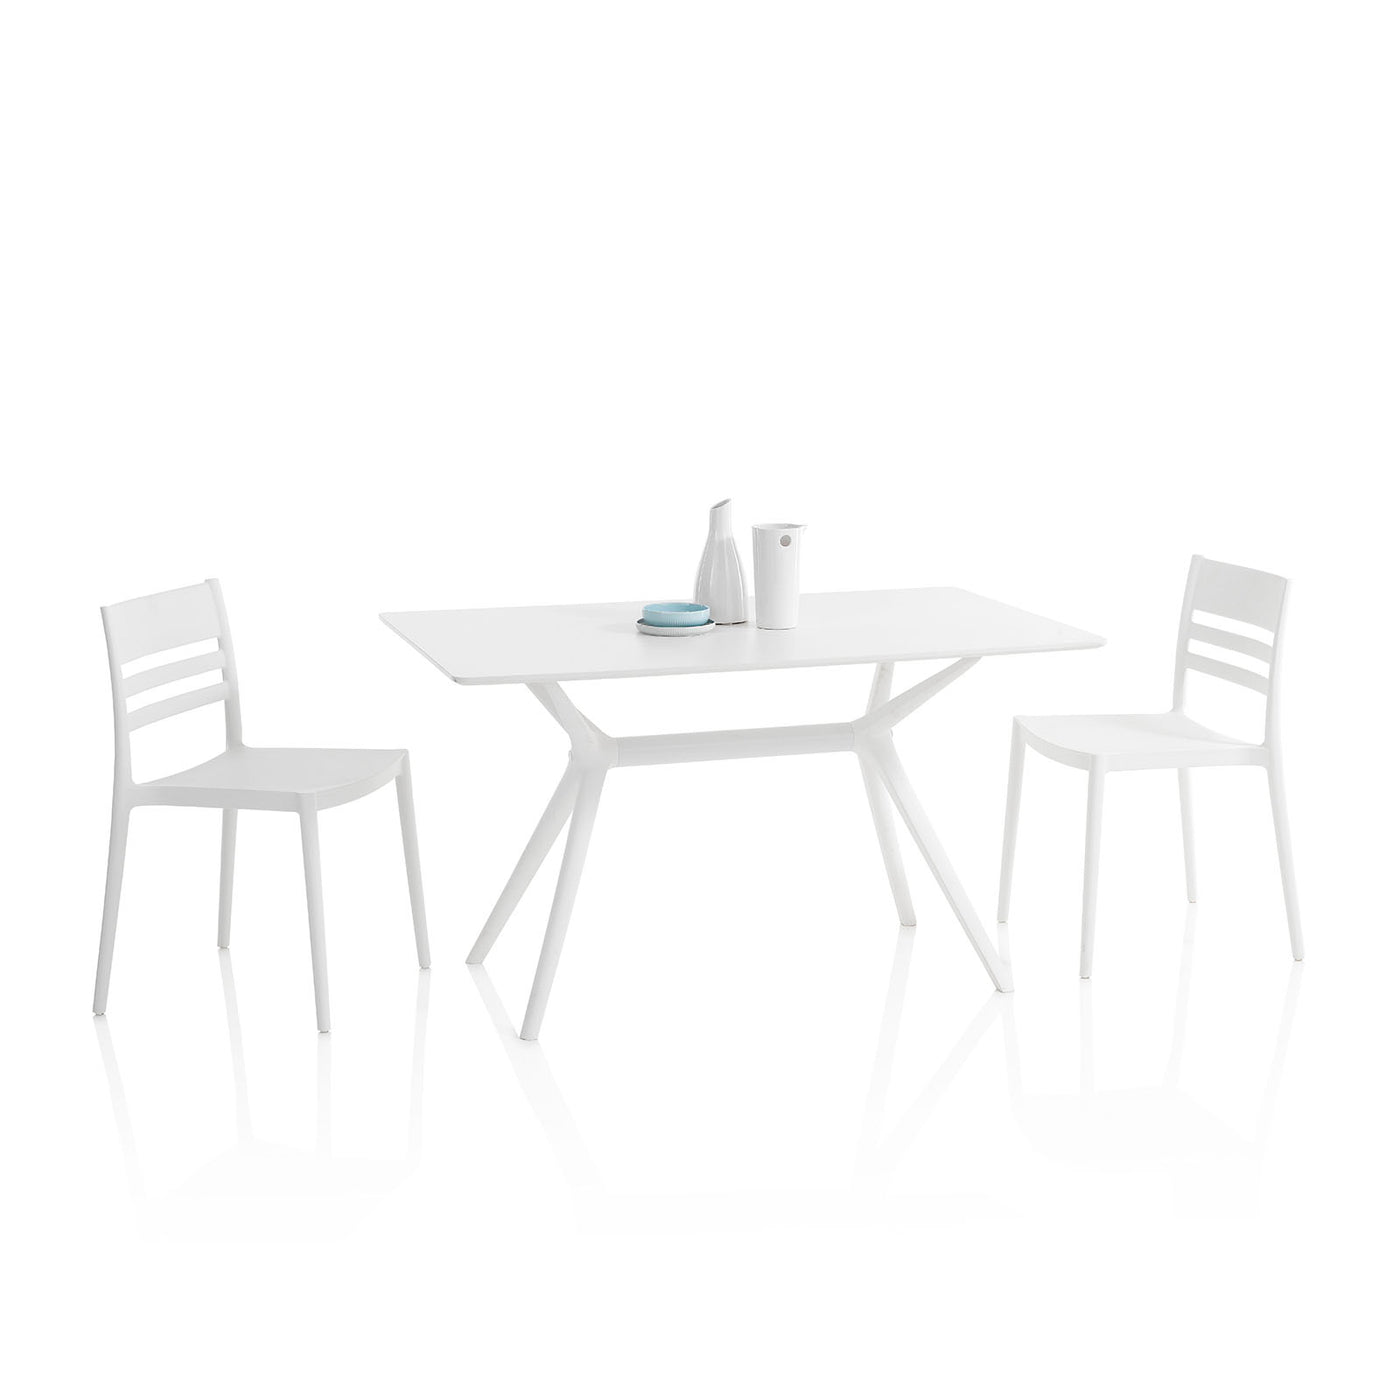 Indoor/outdoor table SNAKE white